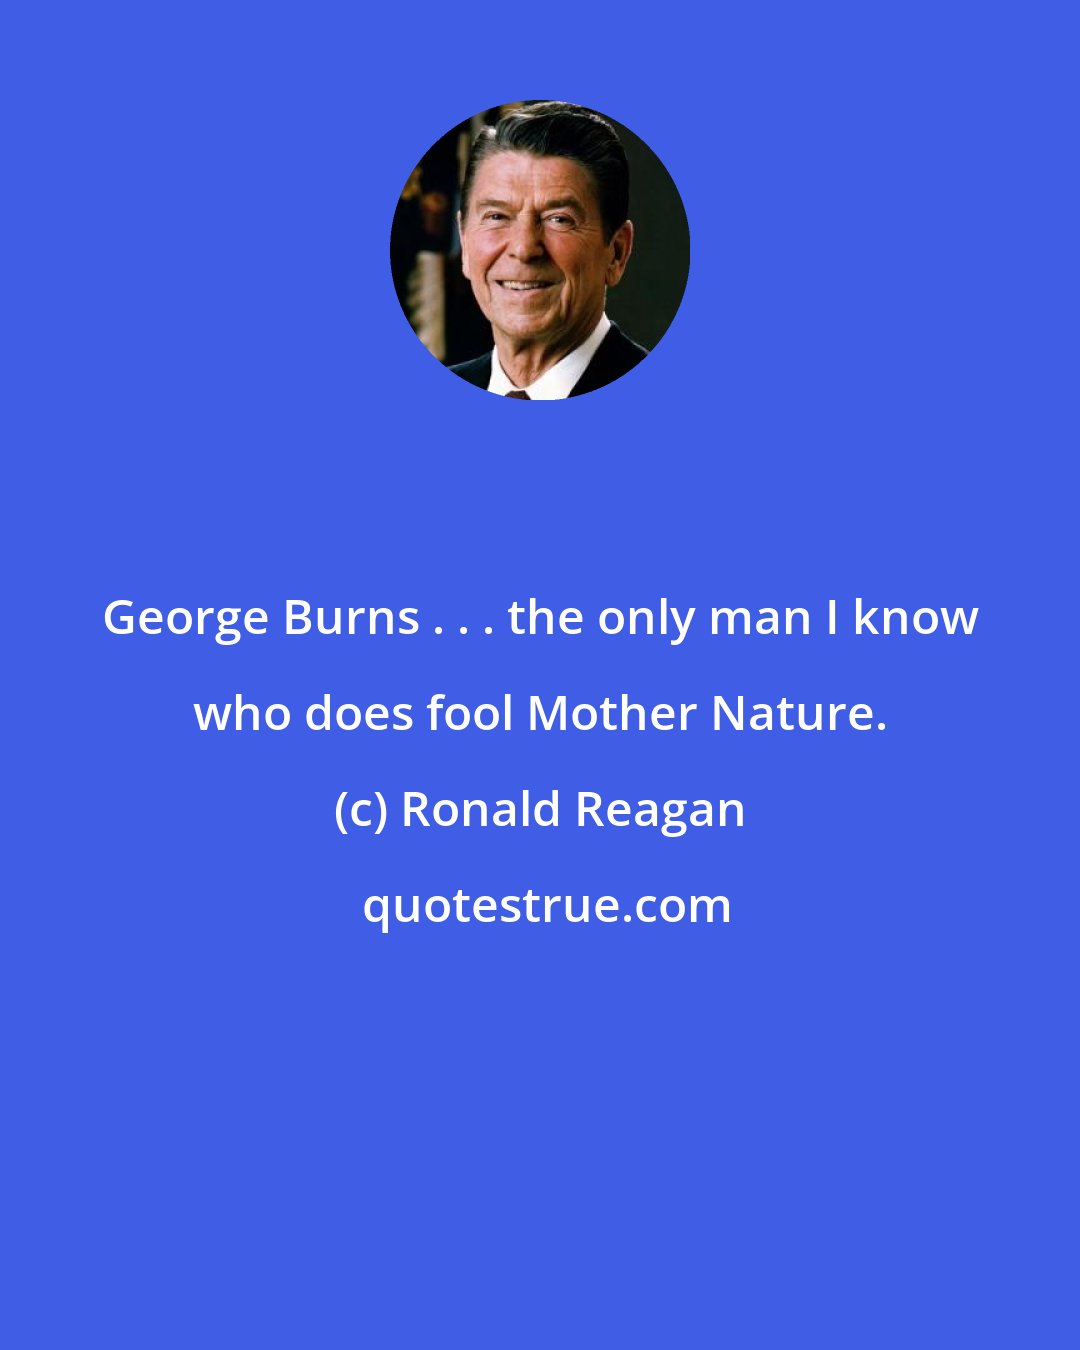 Ronald Reagan: George Burns . . . the only man I know who does fool Mother Nature.